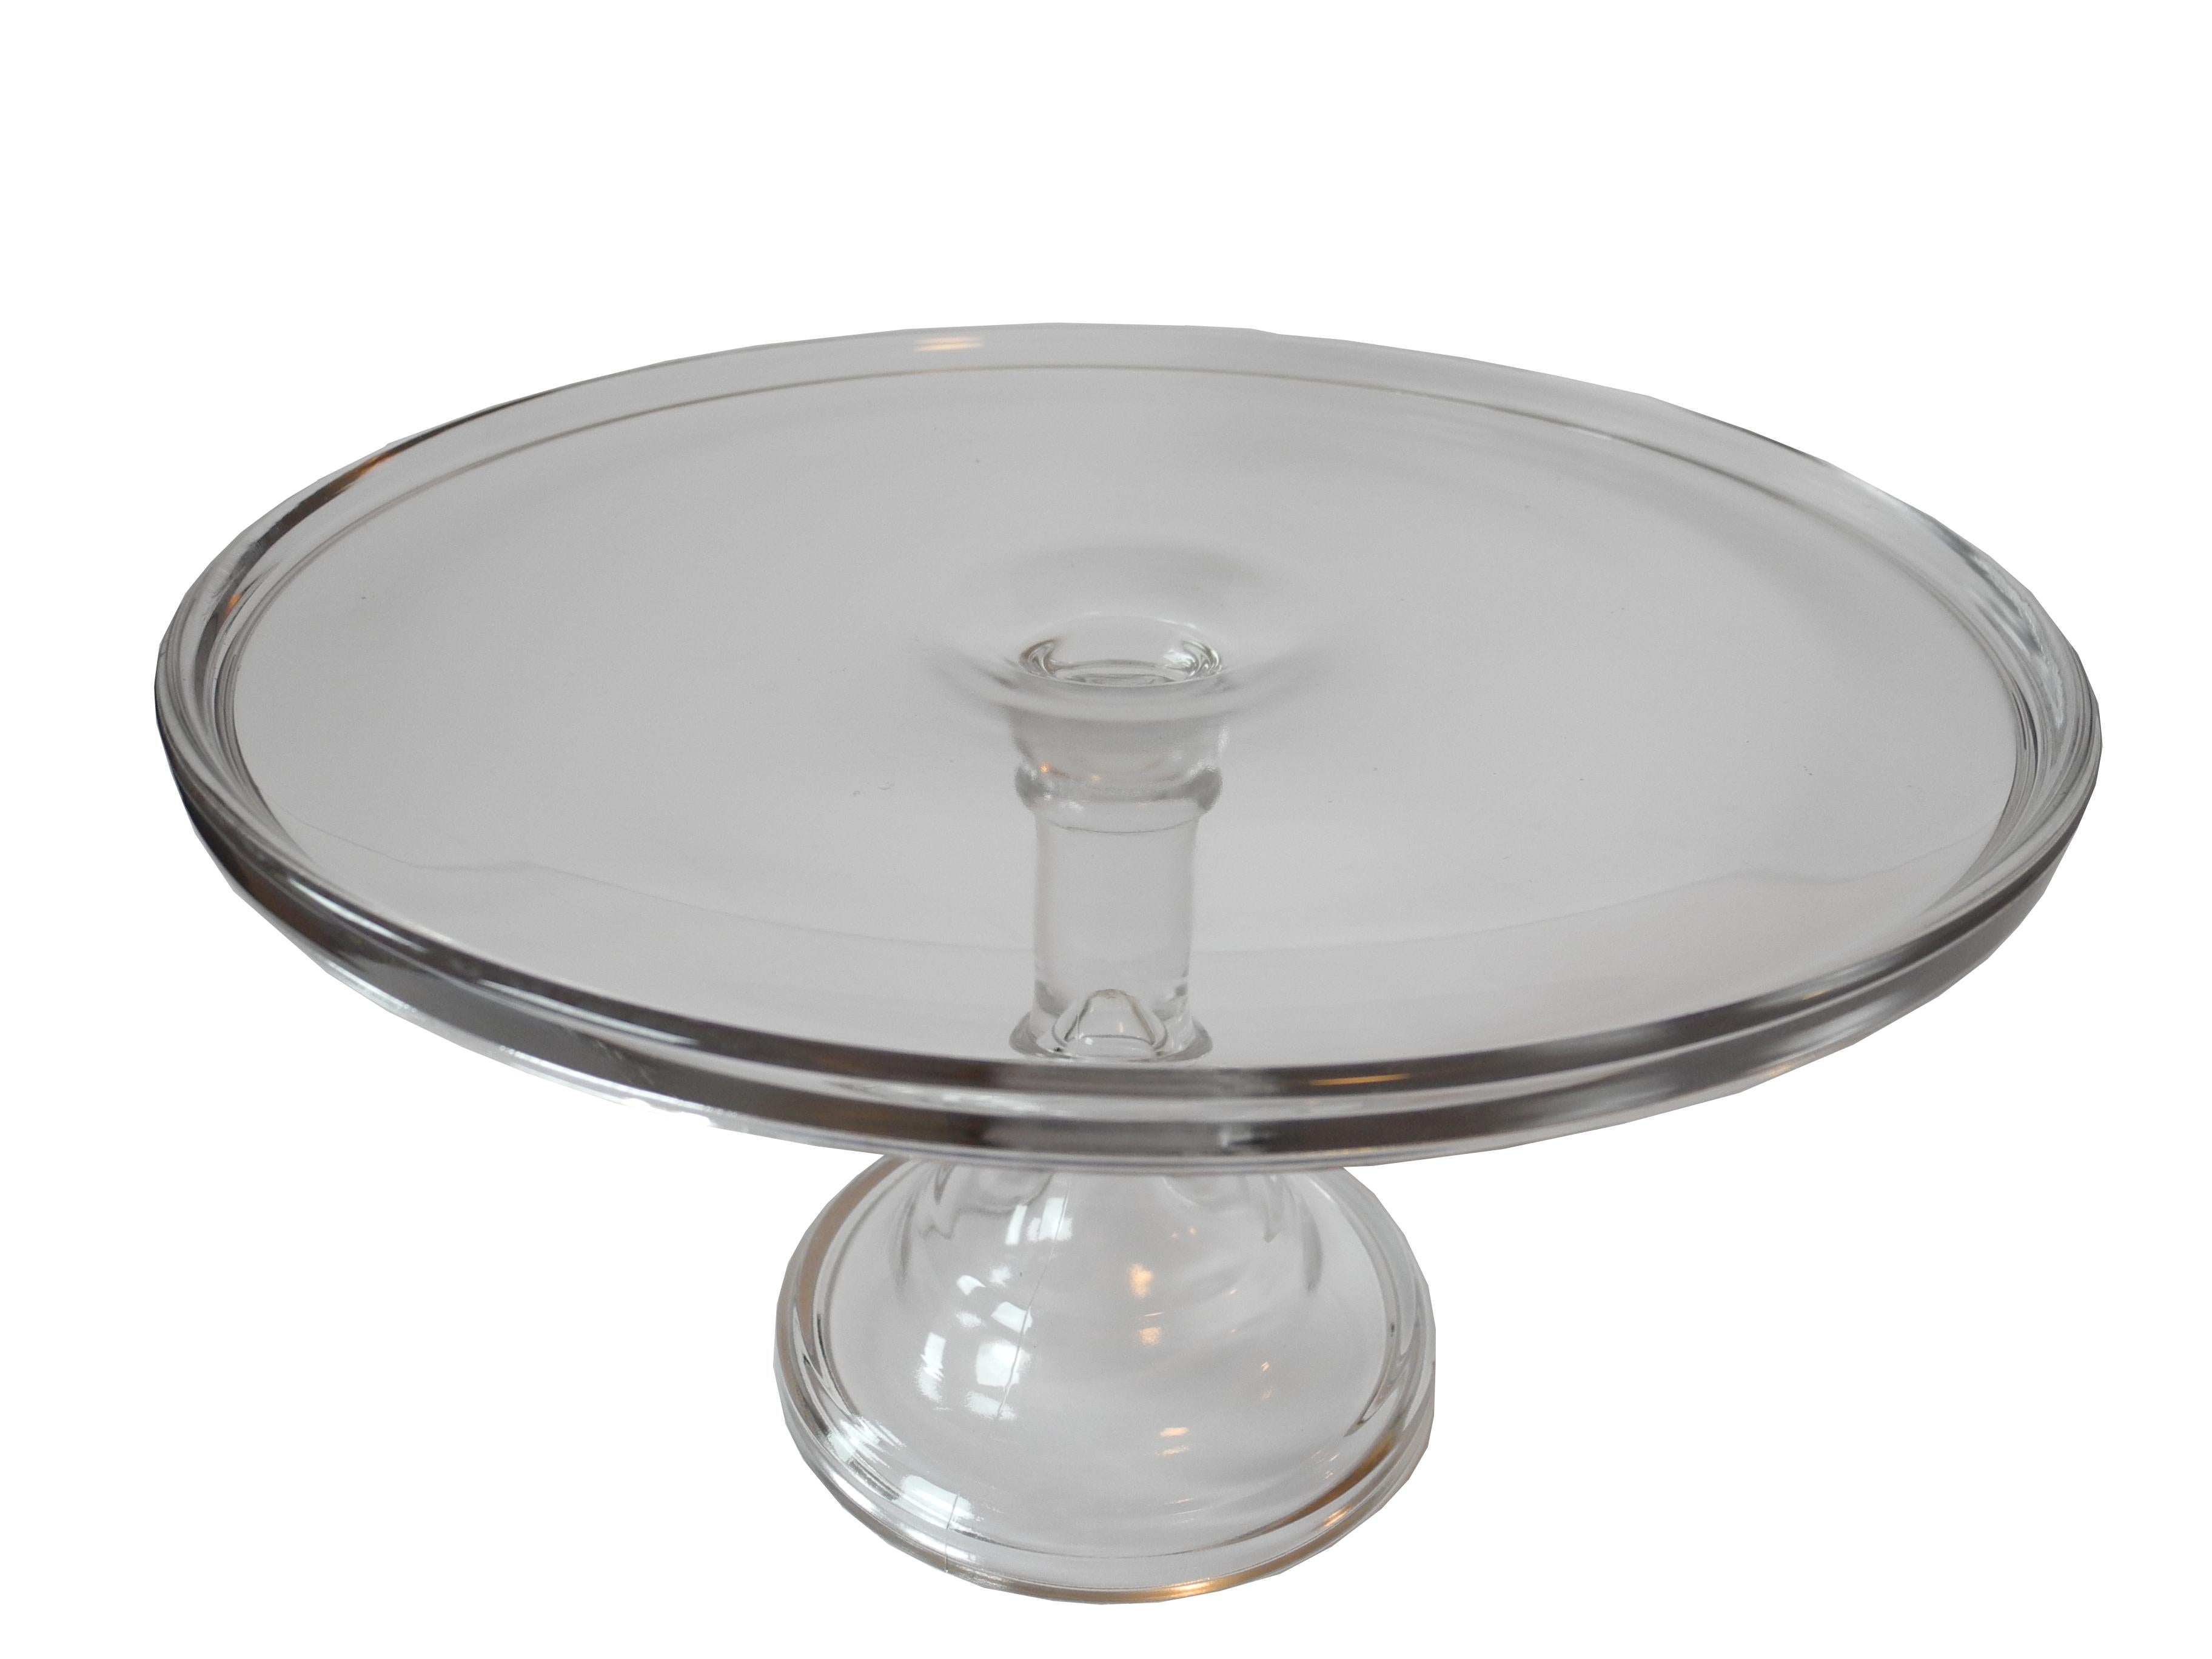 American Classical Early 20th Century Large Pressed Glass Cake Stand / Table Center Piece For Sale